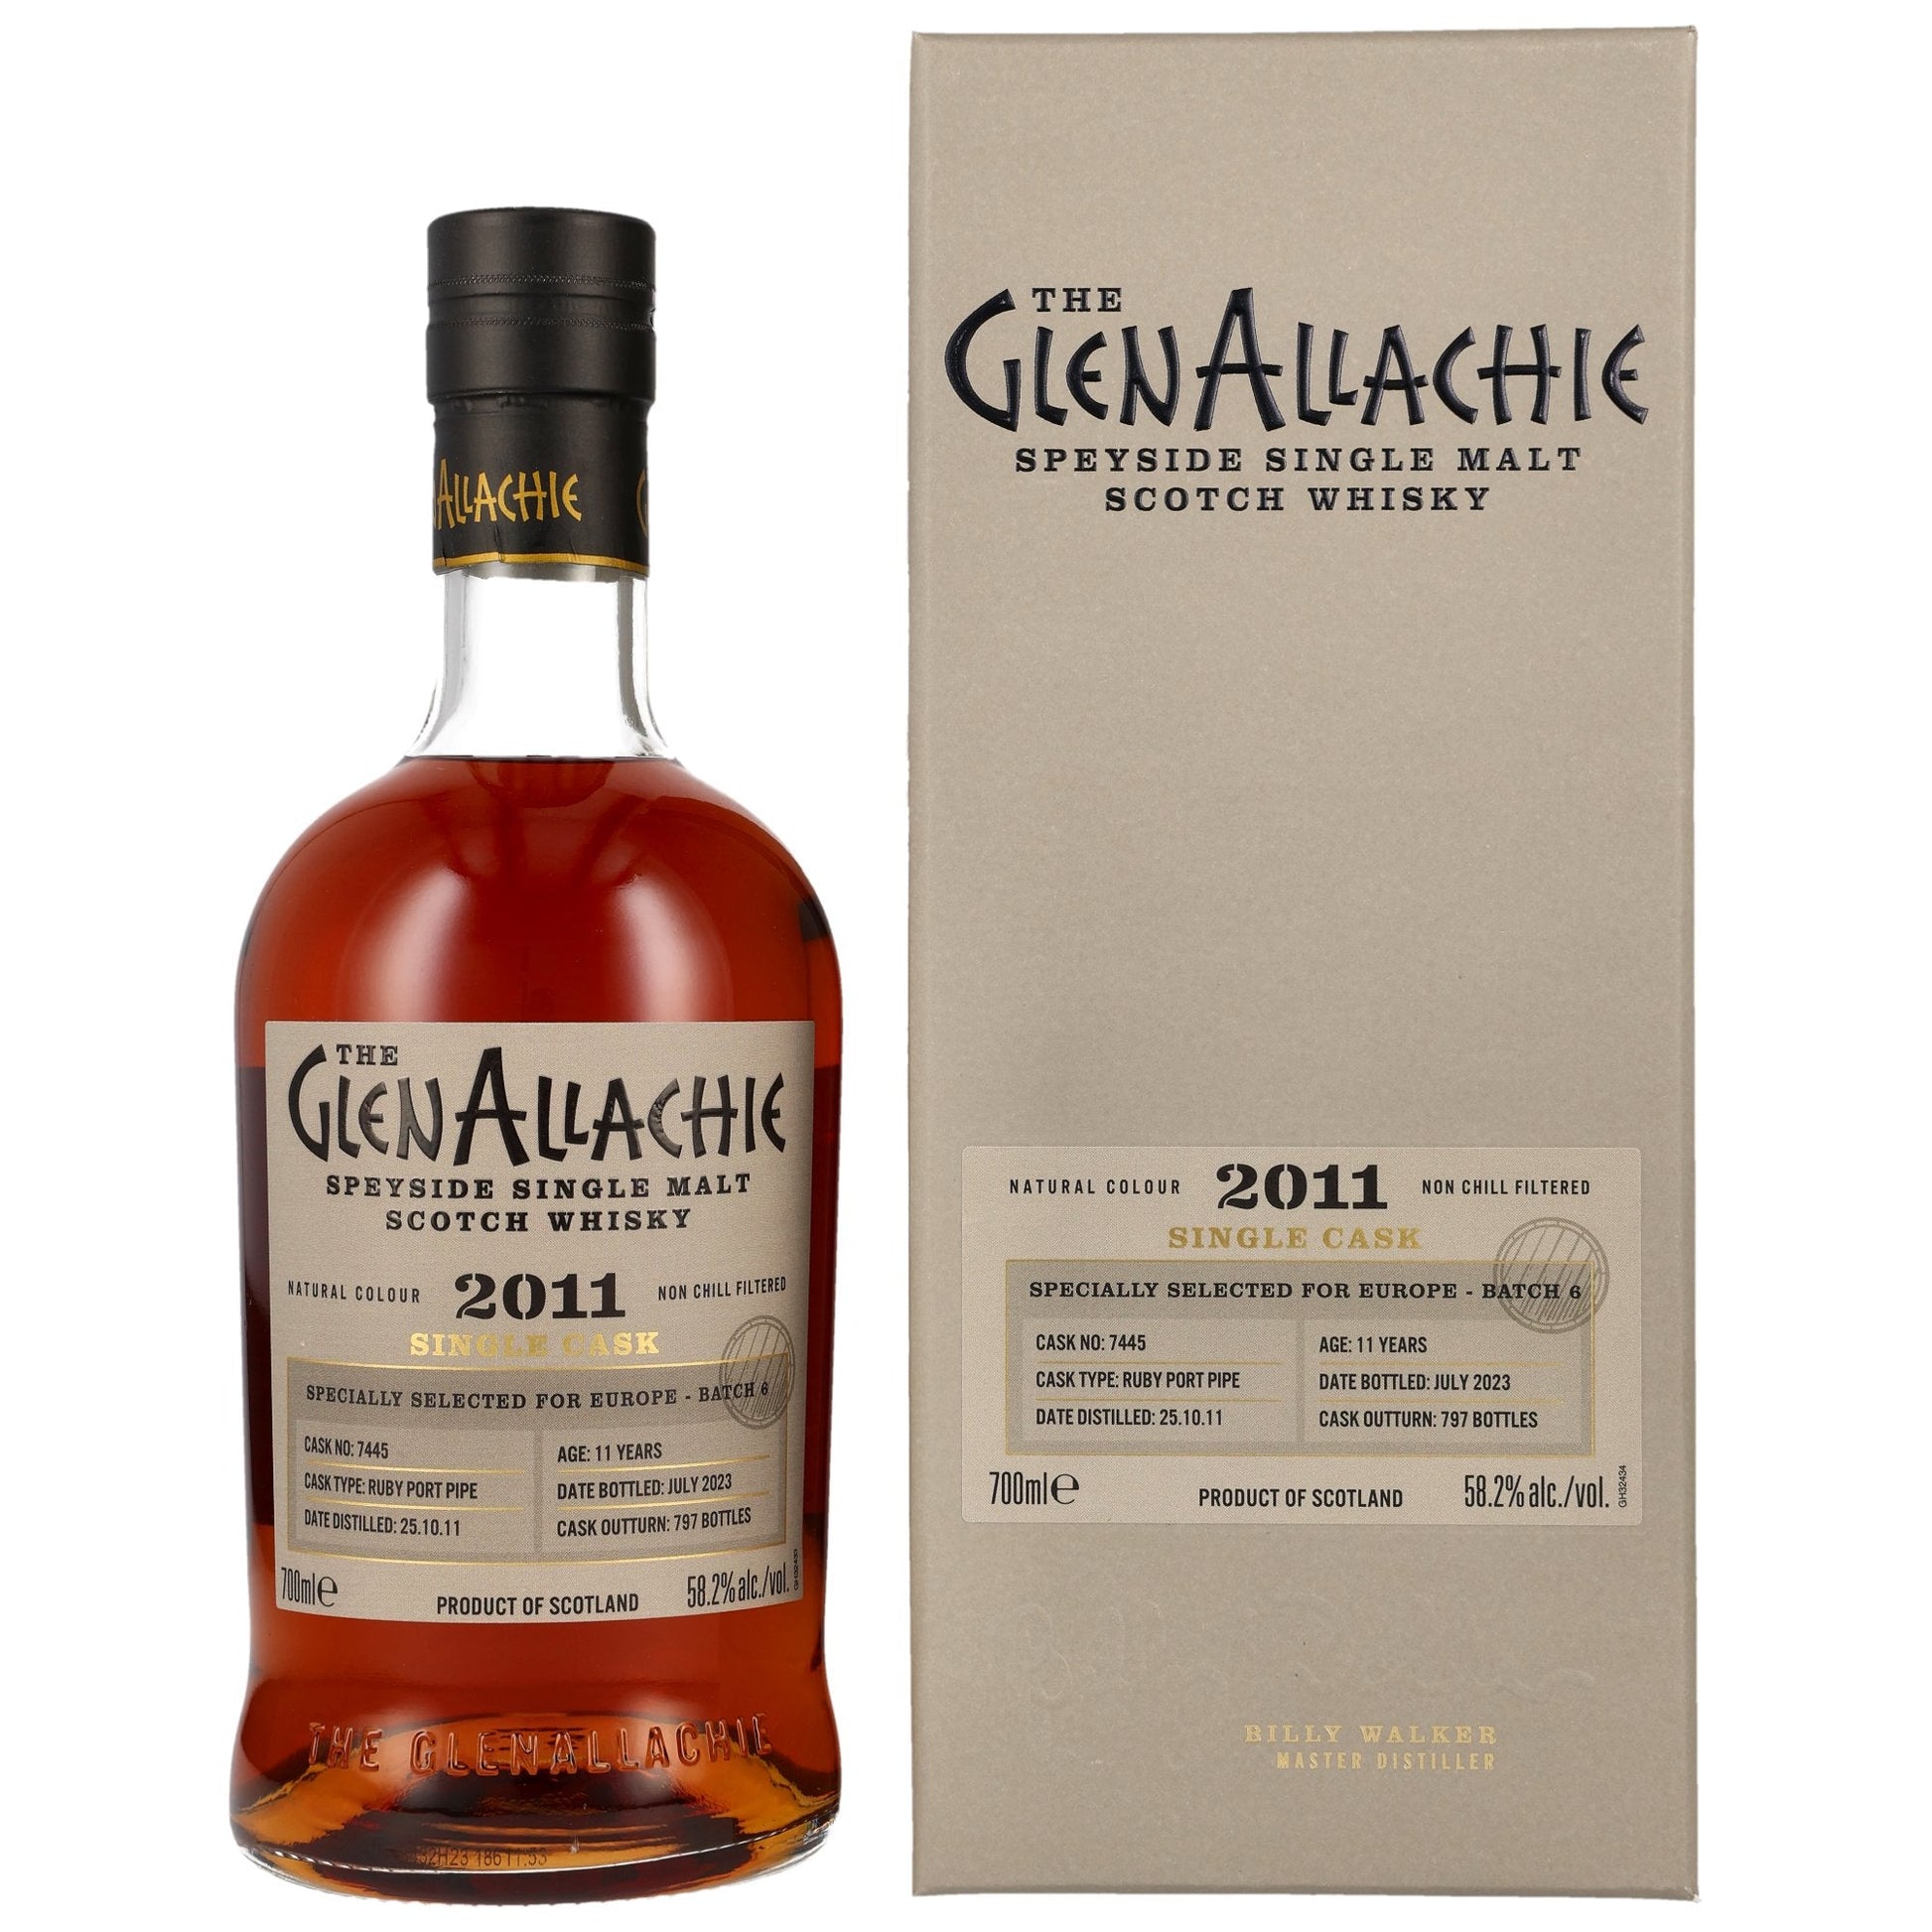 GlenAllachie | Ruby Port Pipe #7445 | 11 Jahre | 2011/2023 | 58,2%GET A BOTTLE